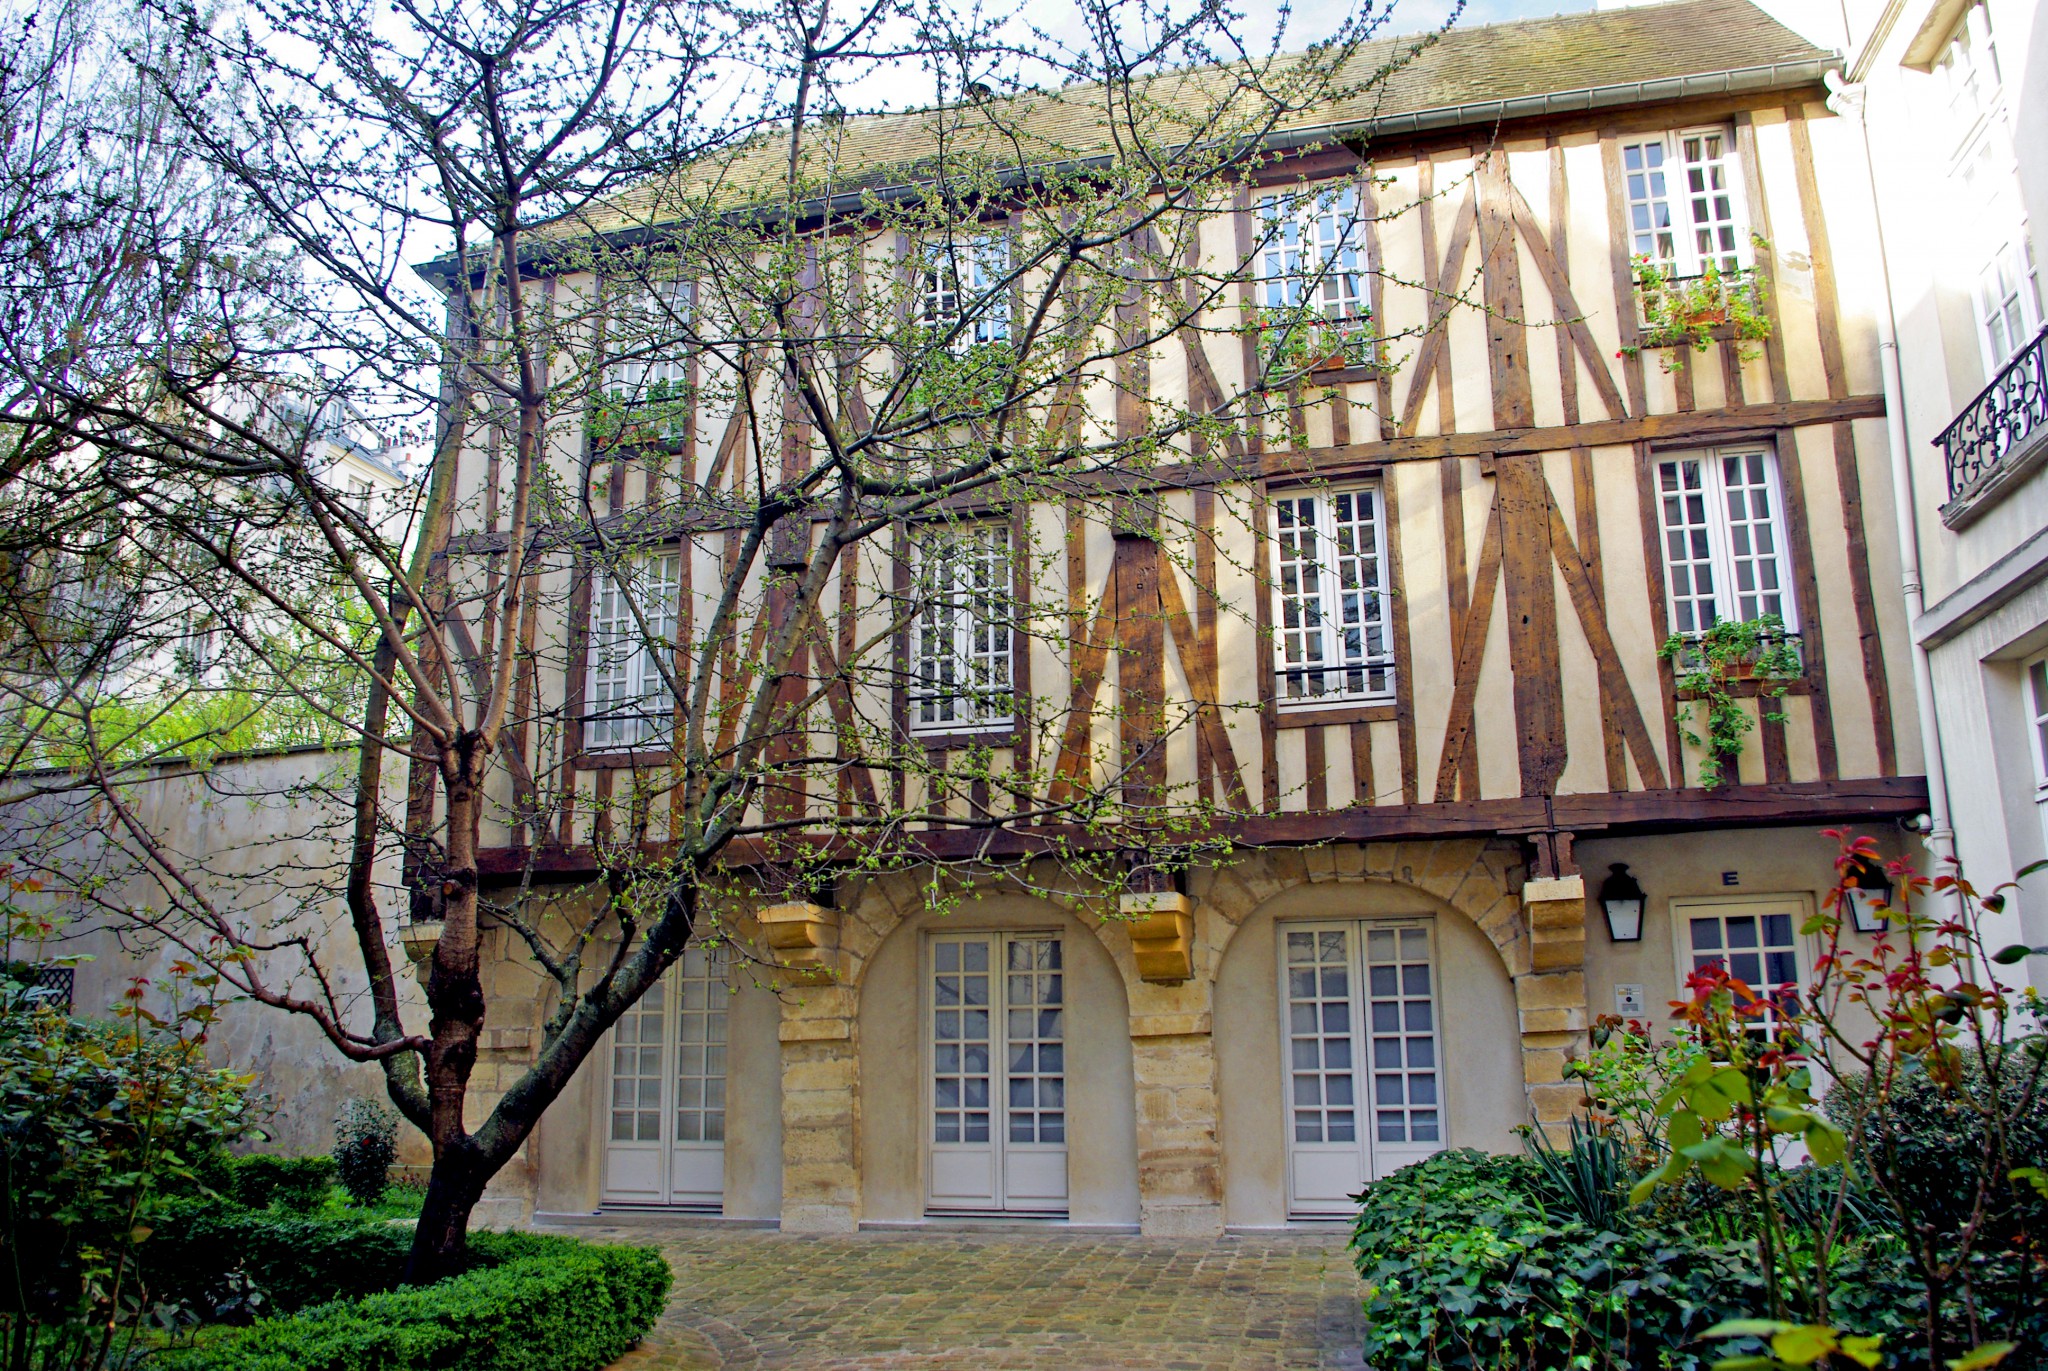 Half-timbered house, 5 rue de Braque, Paris © French Moments